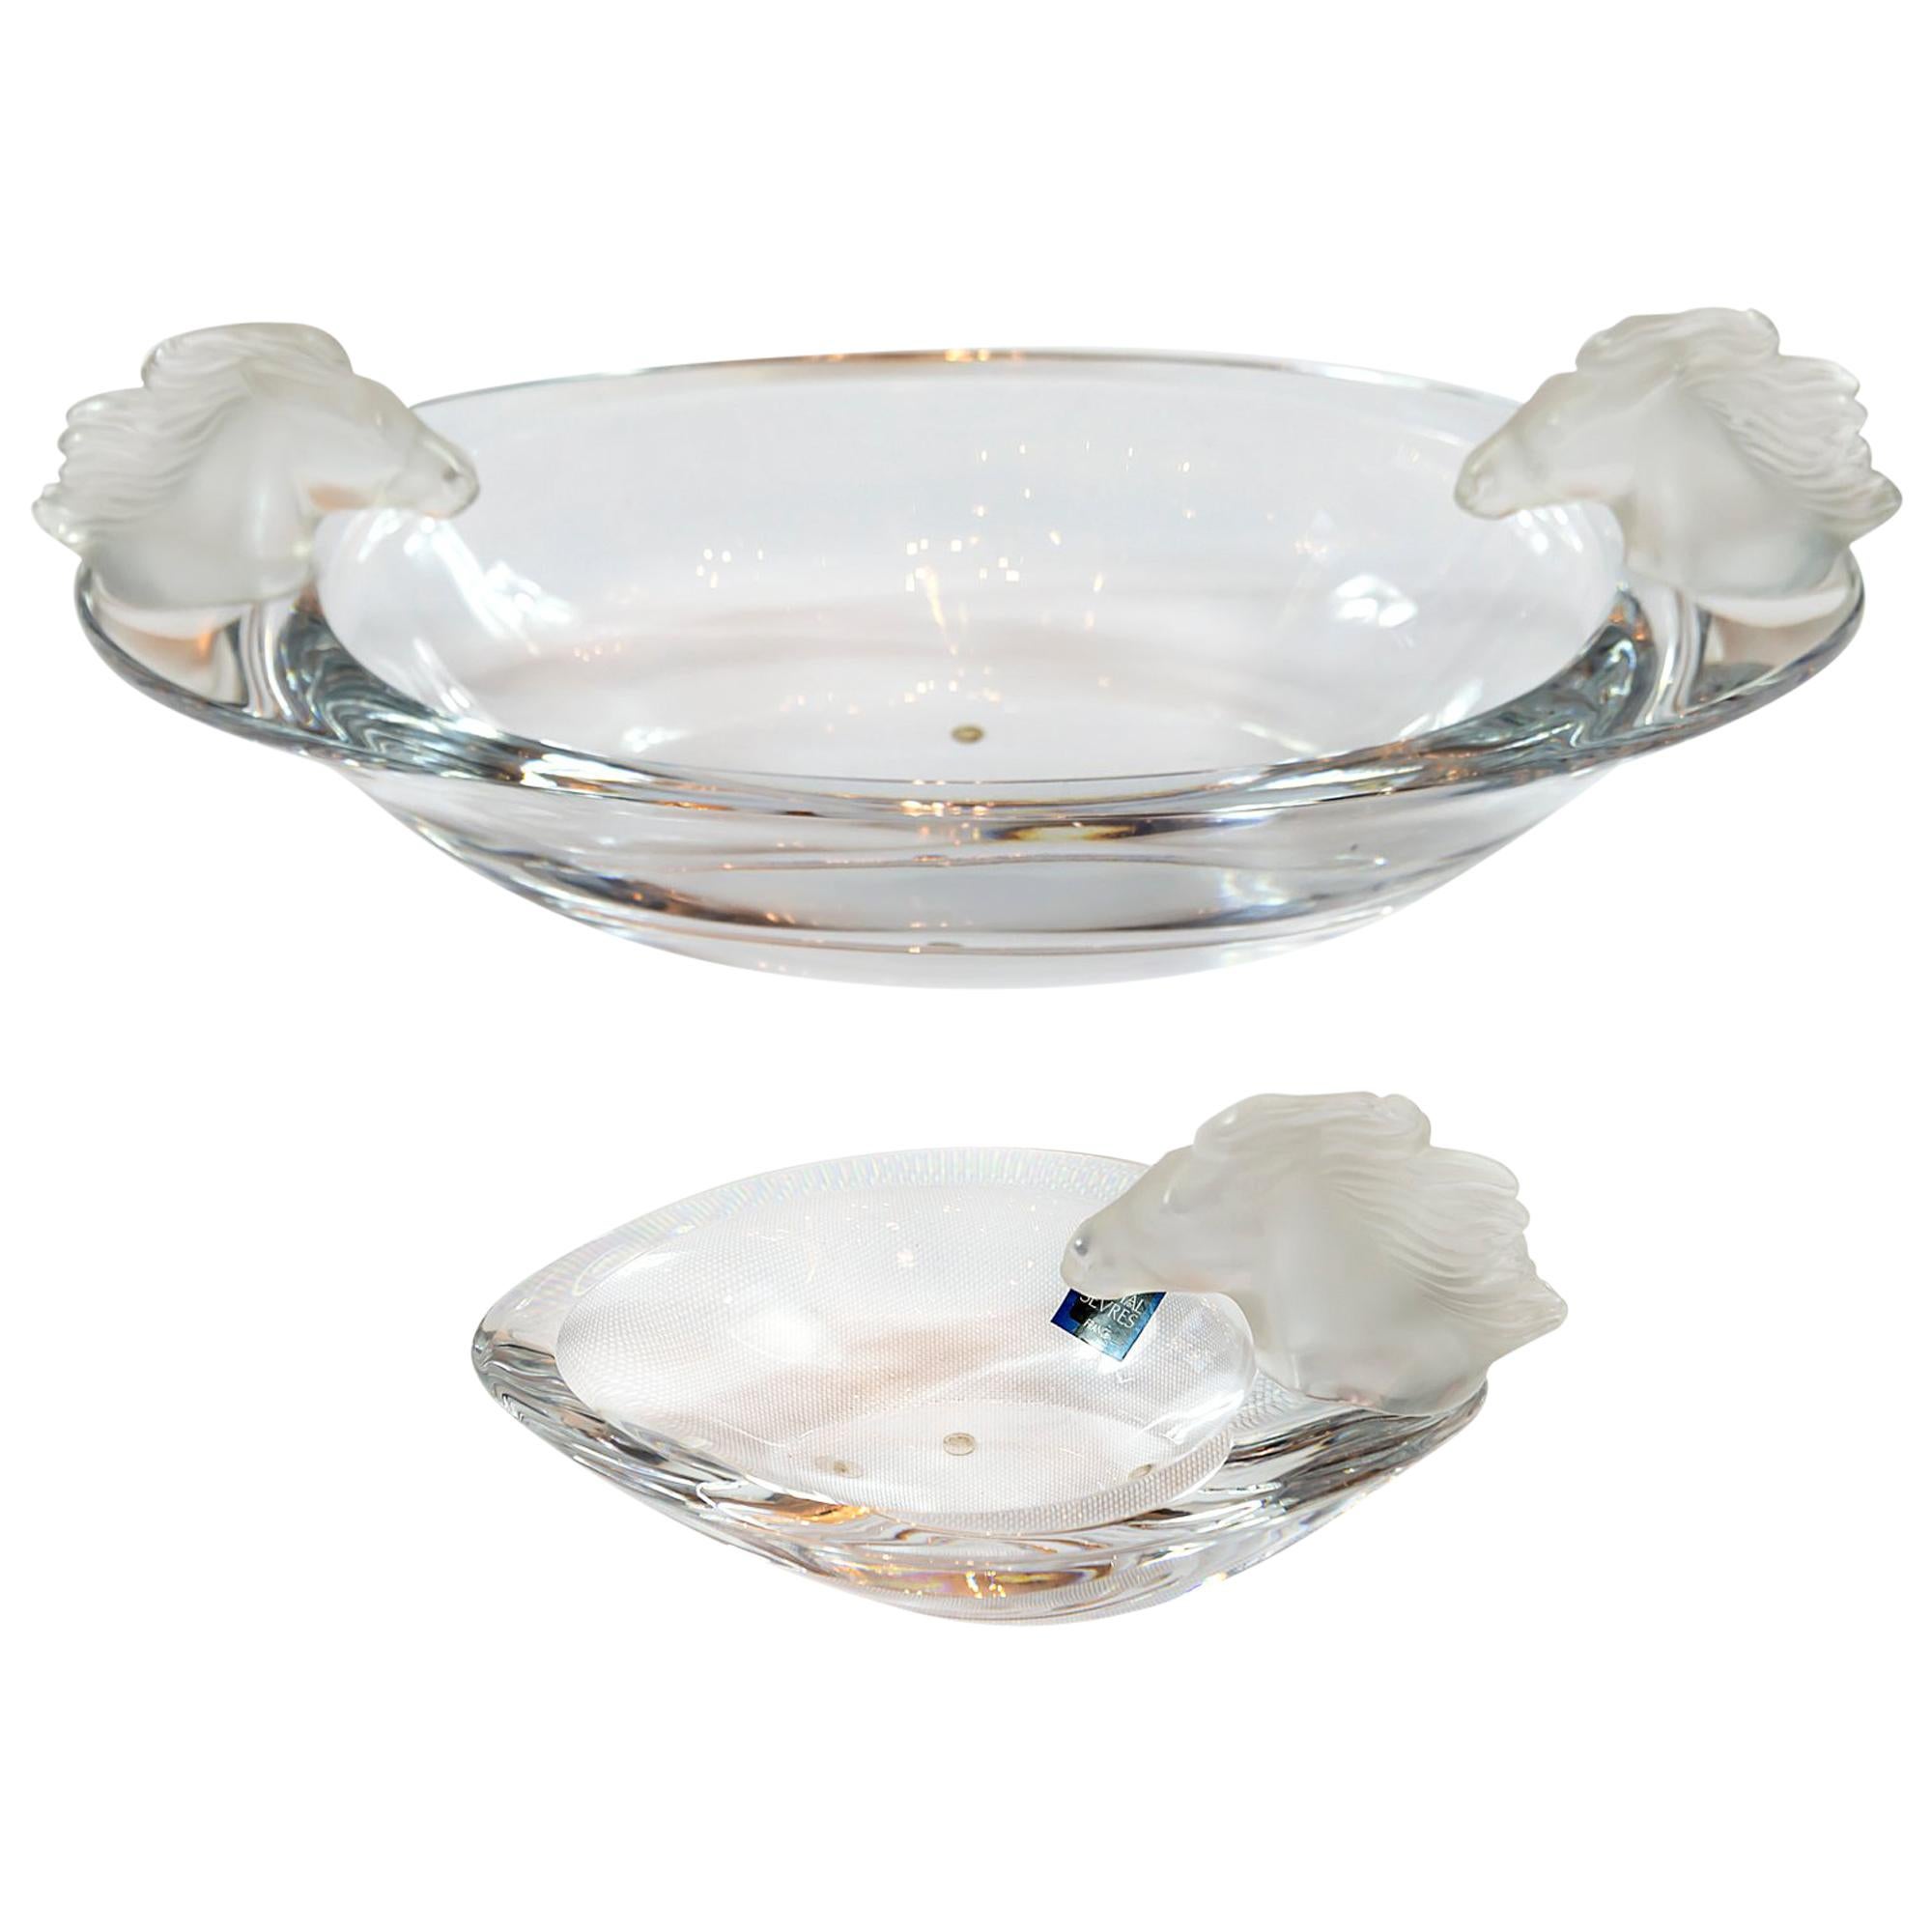 Set of Sevres Crystal Bowls Decorated with Horse Heads